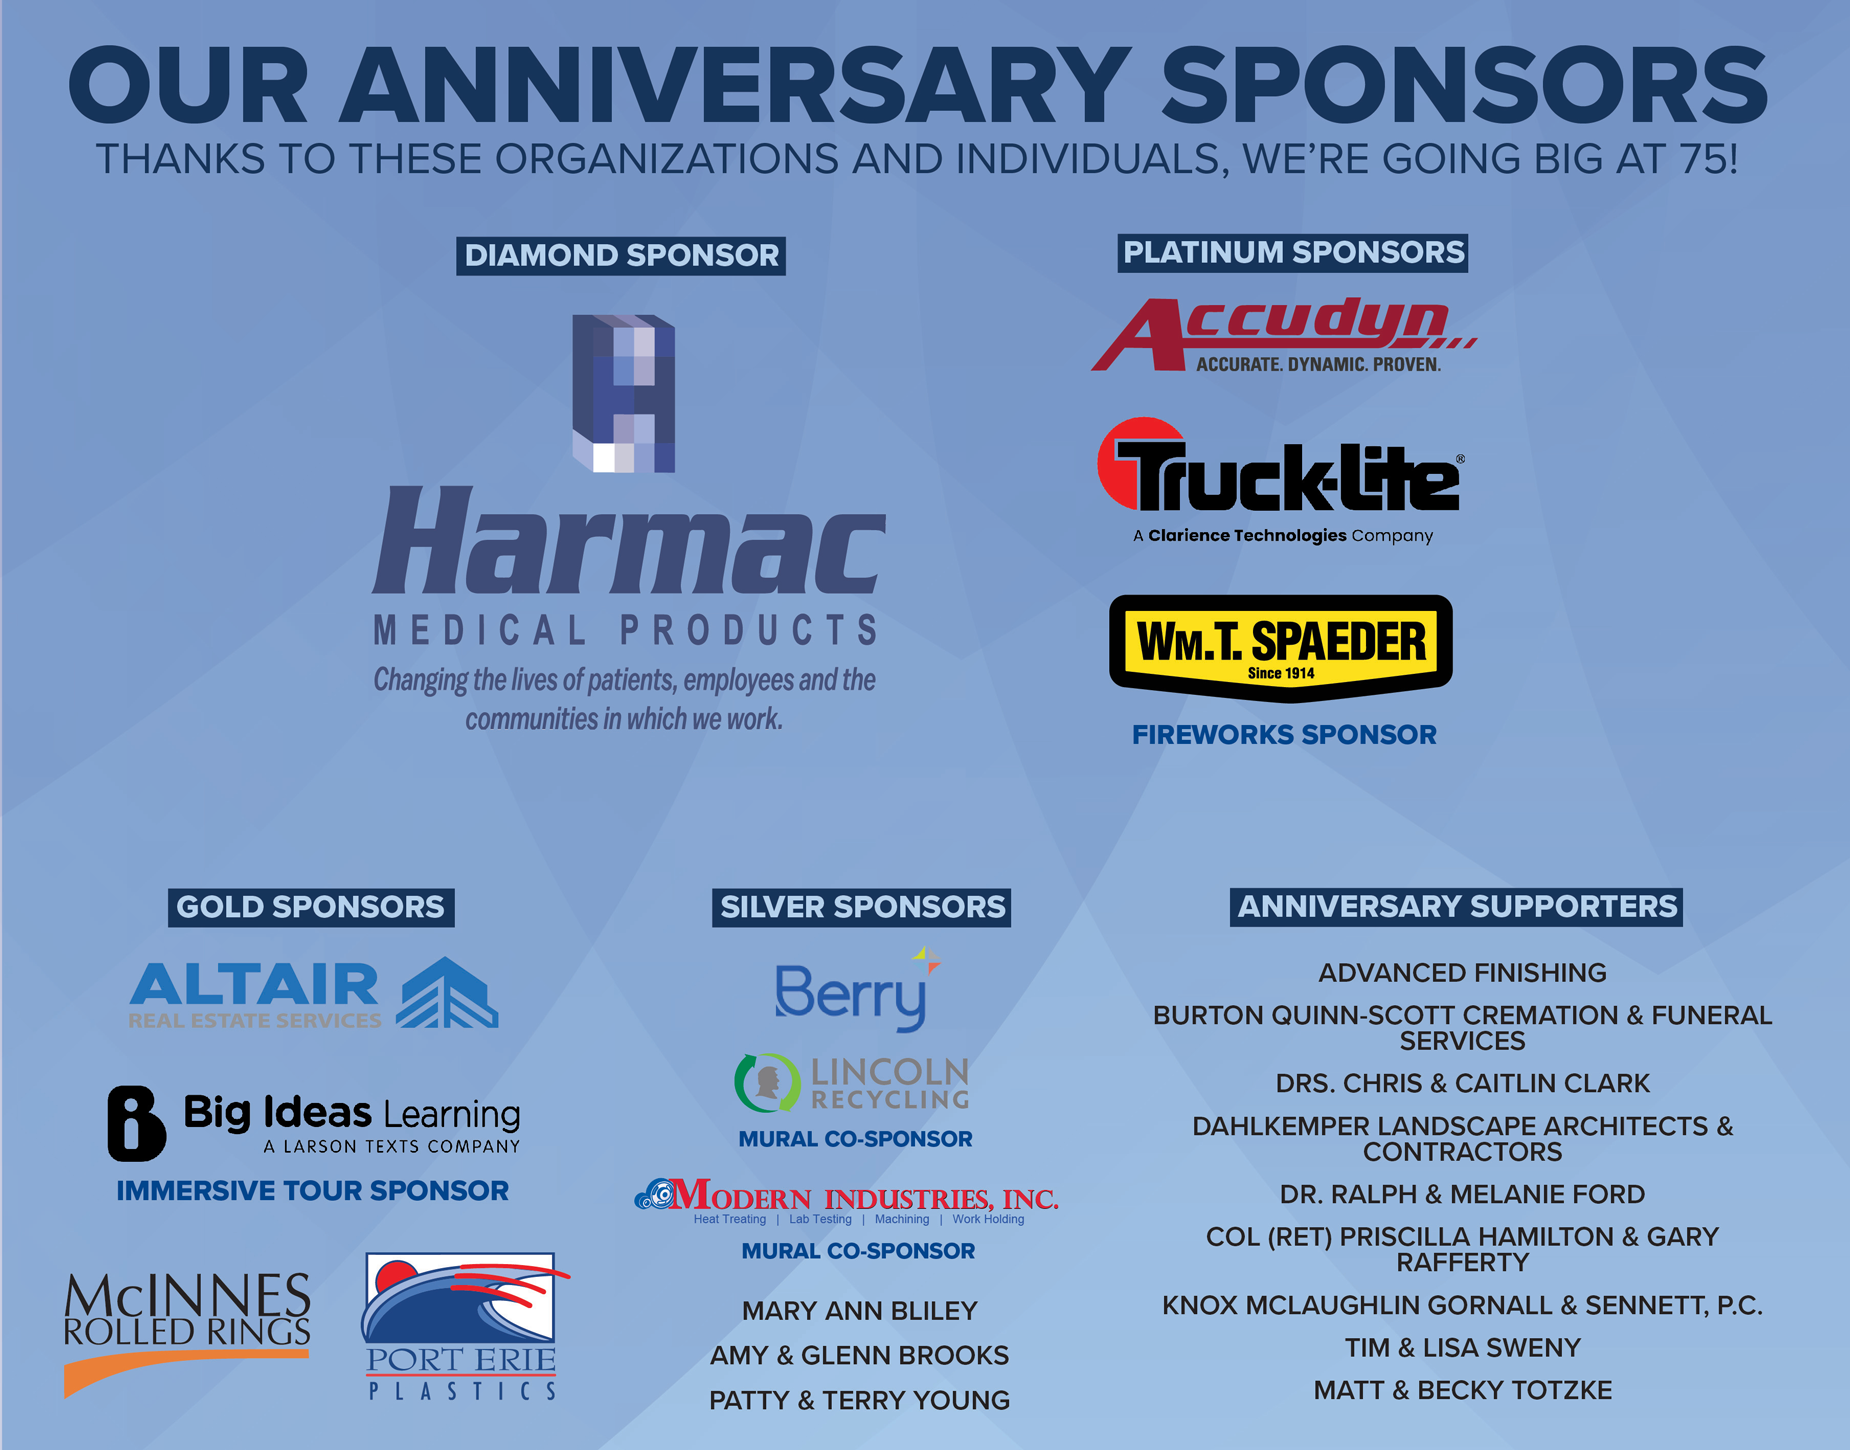 Our Anniversary Sponsors. Click link for text list of sponsors.